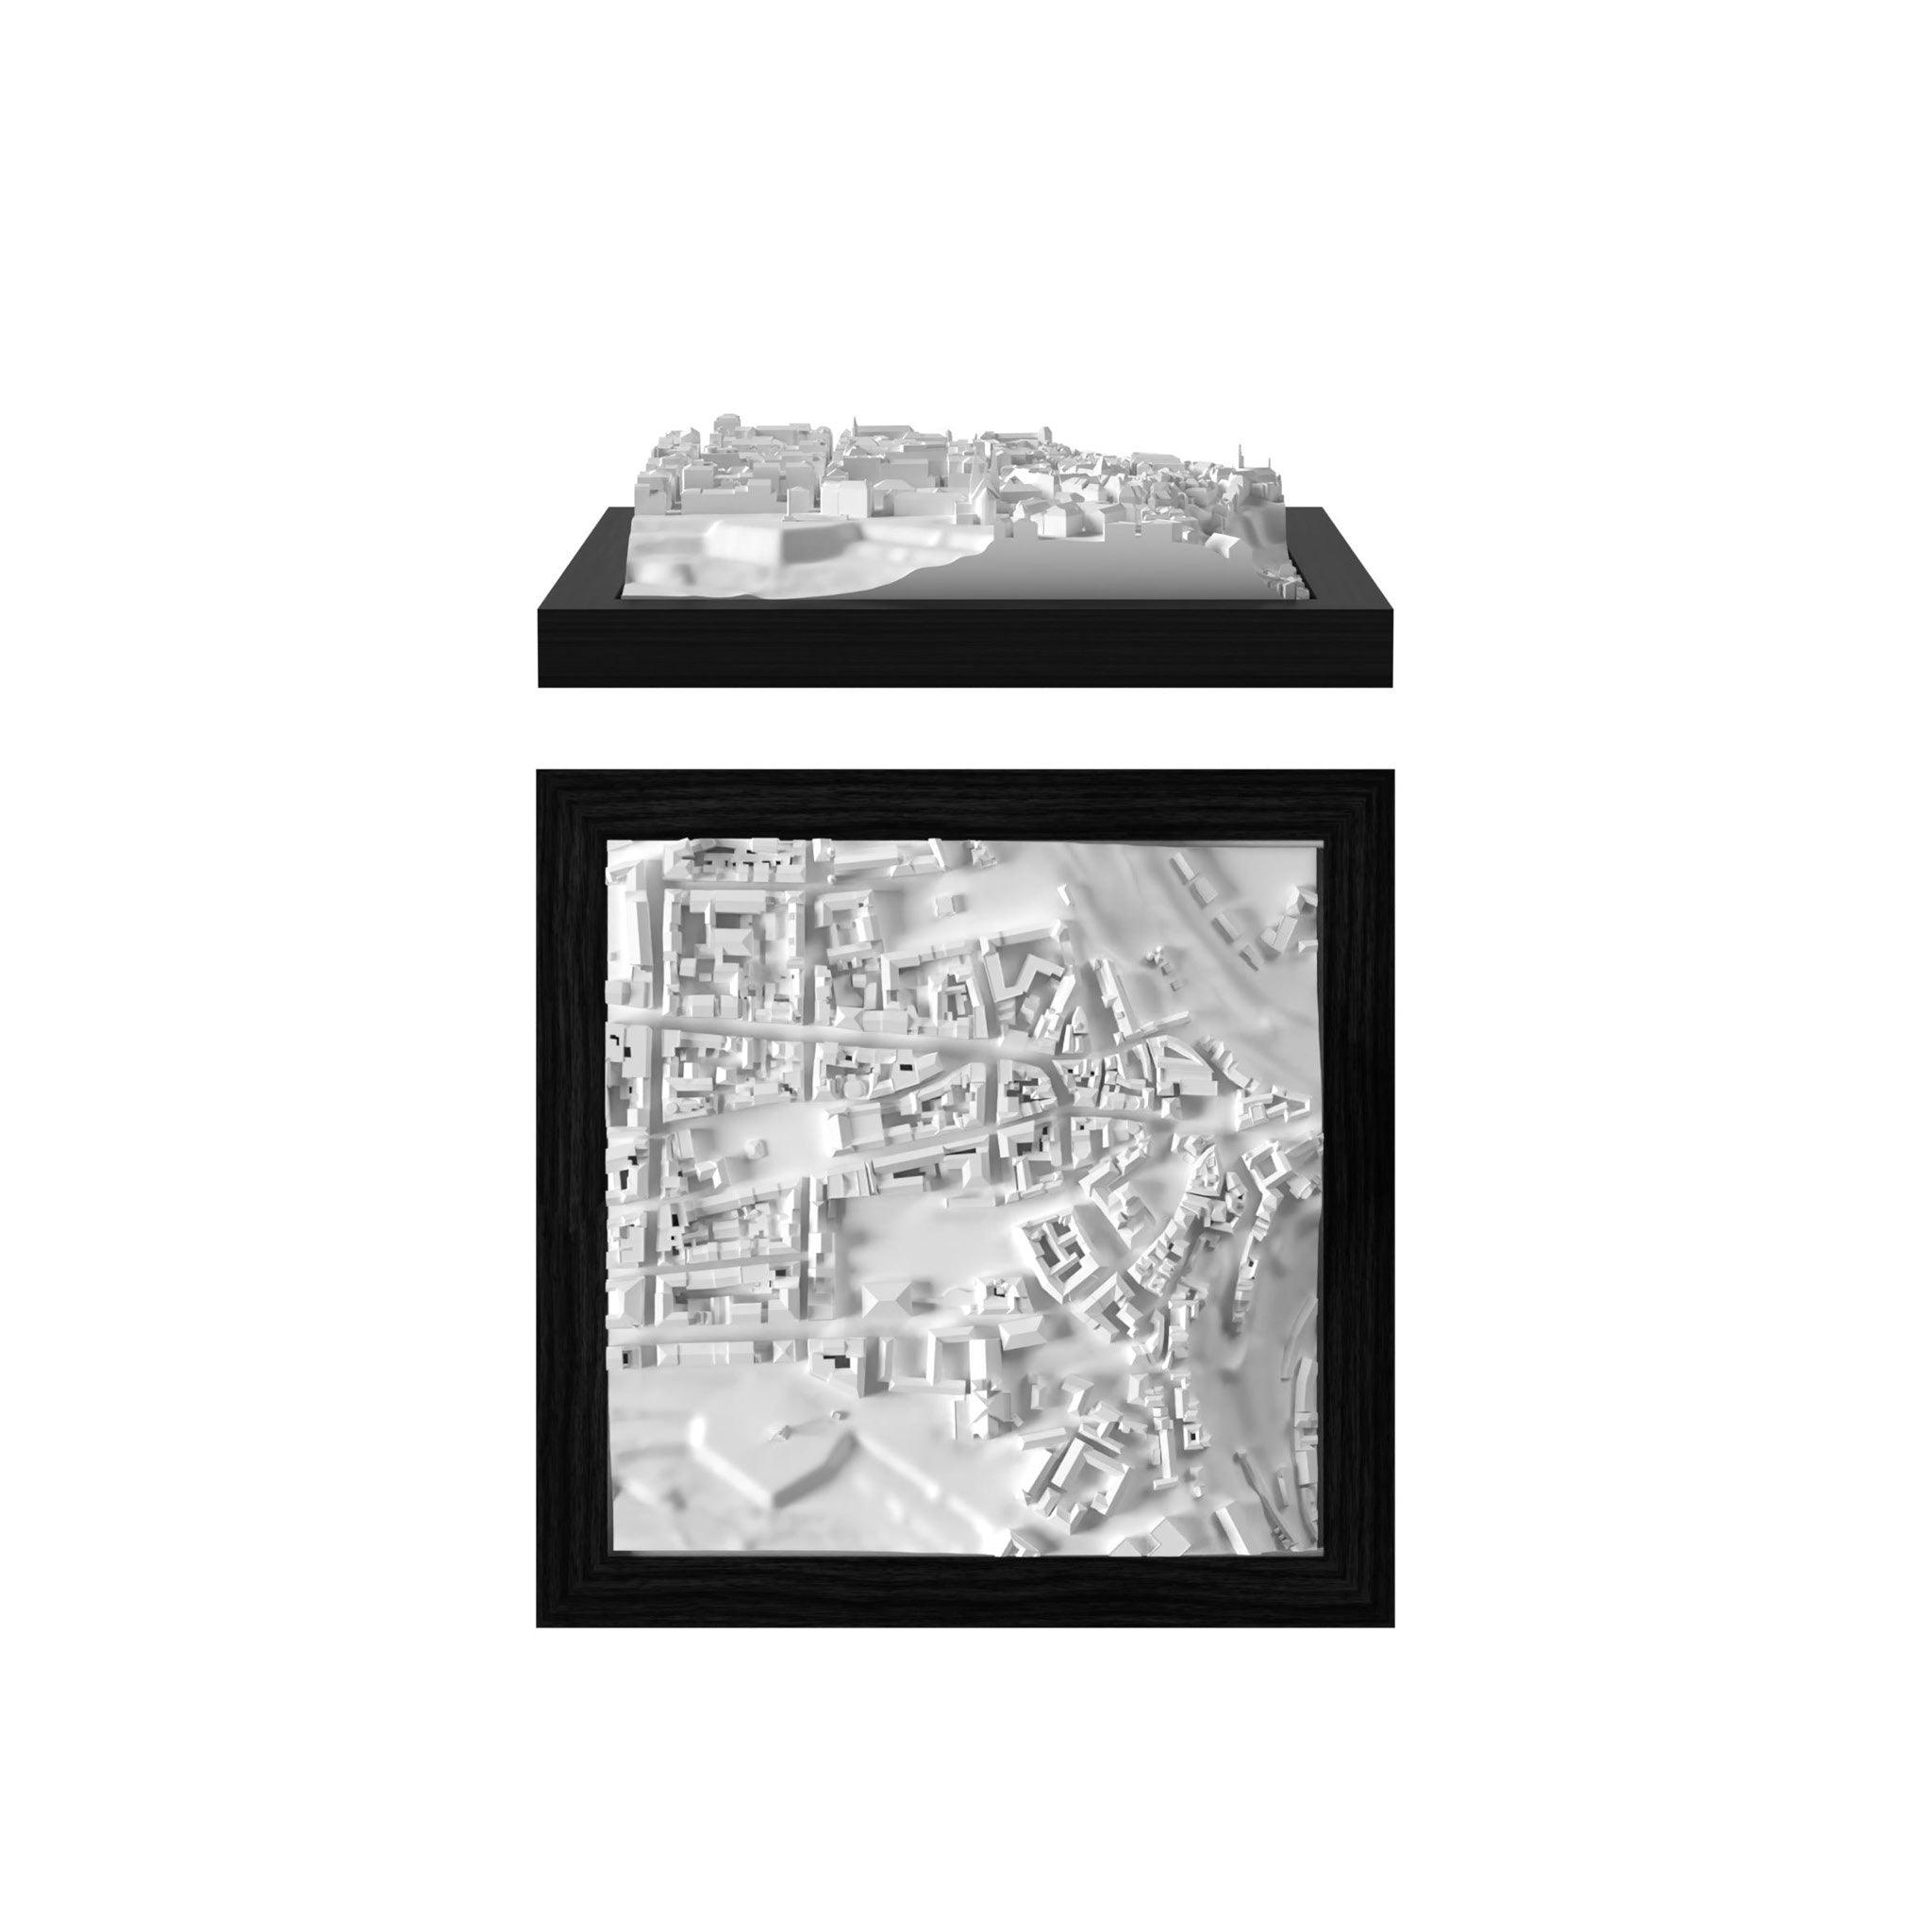 Luxembourg 3D City Model Cube, Europe - CITYFRAMES